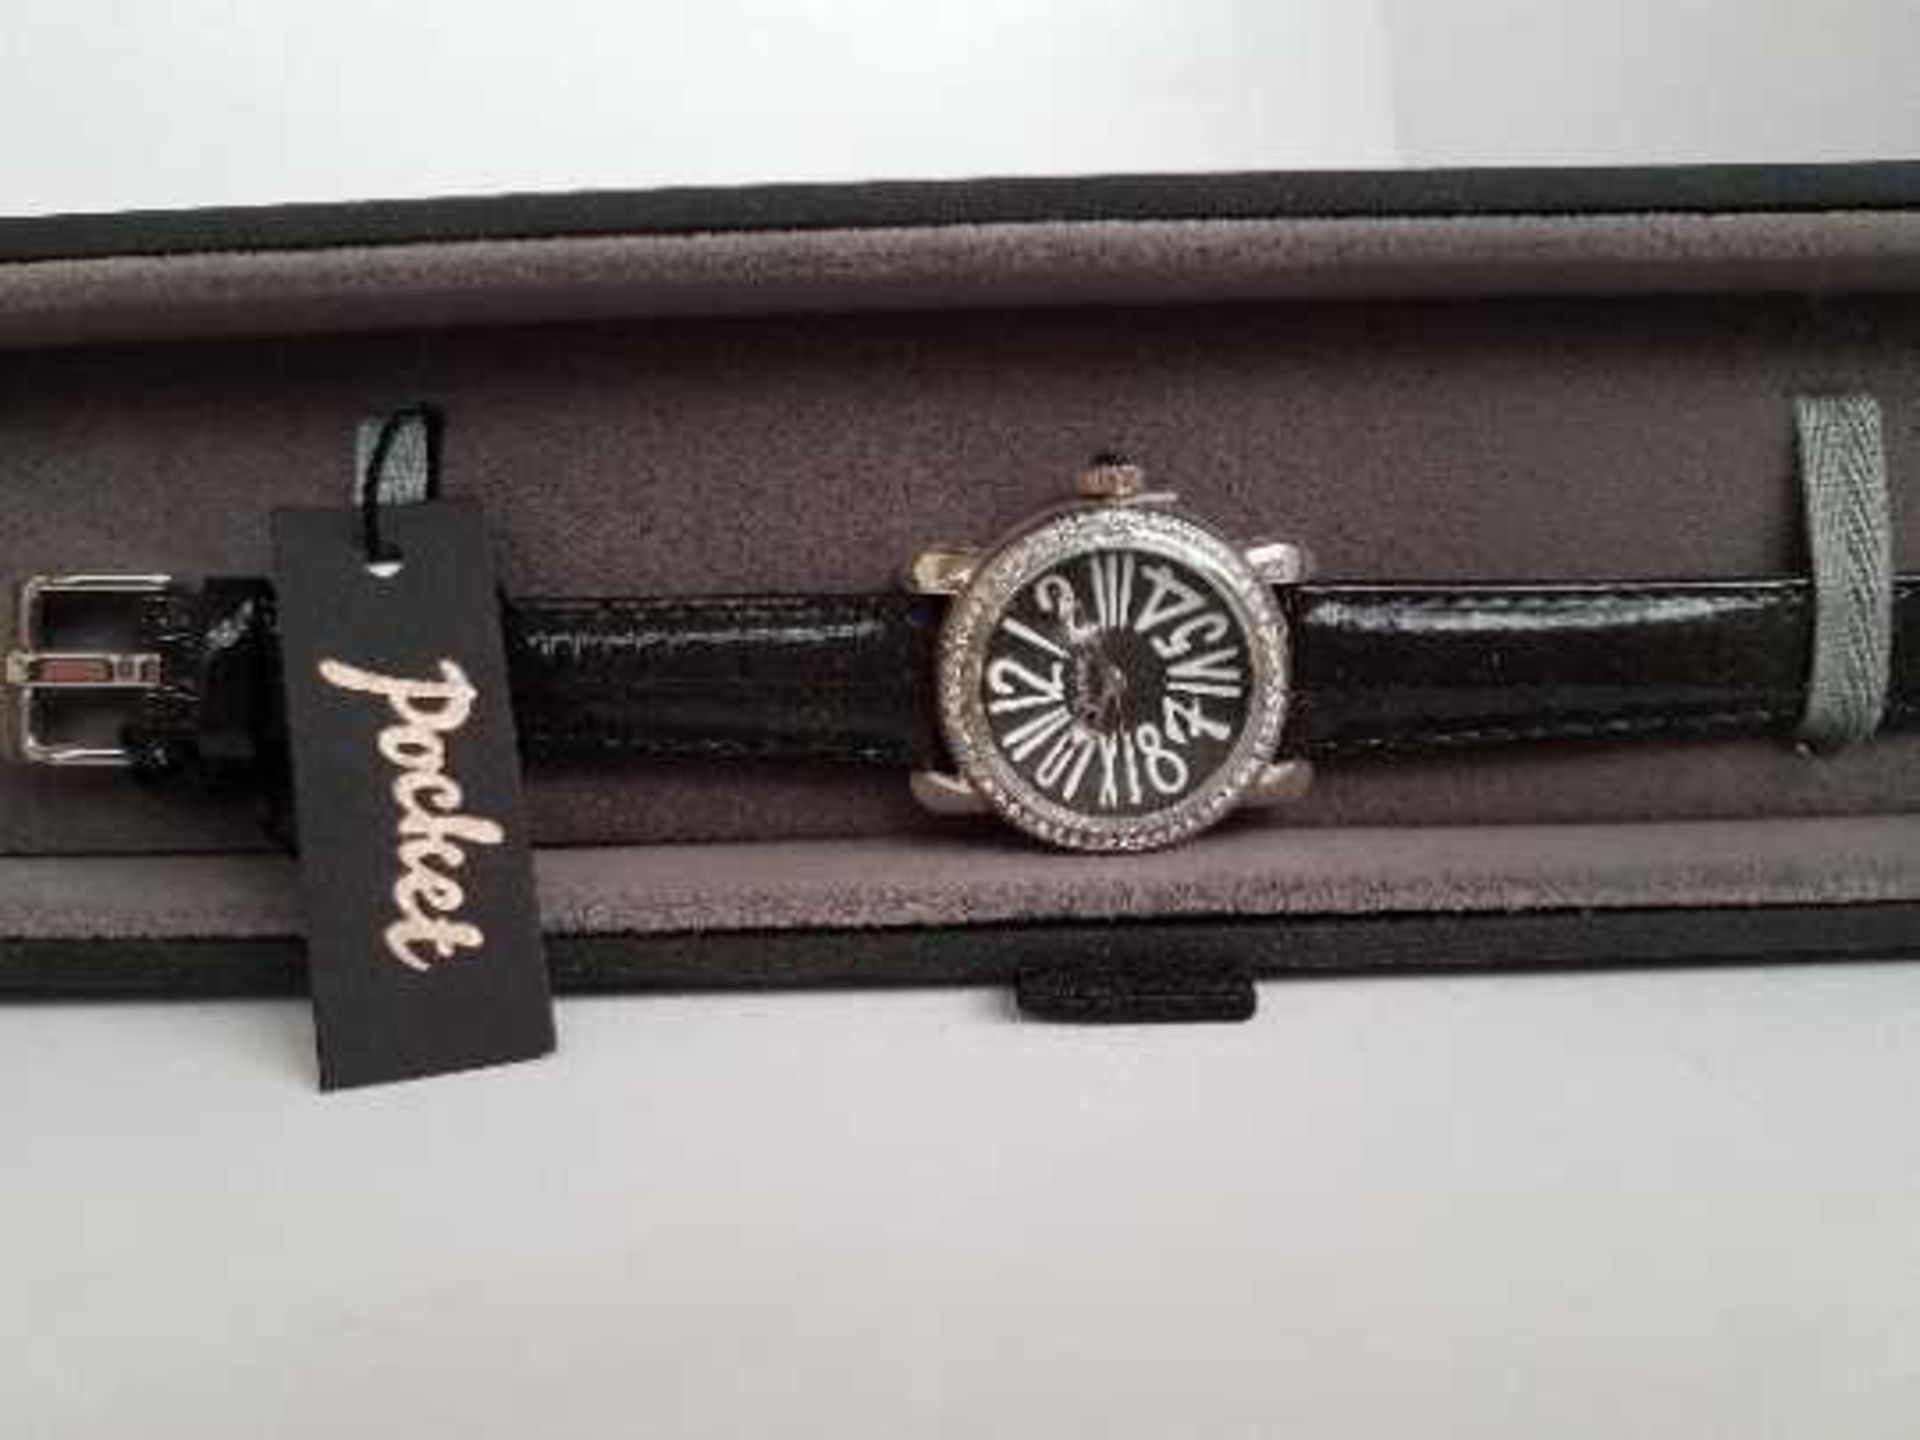 Pocket watch (PK1011) Leather strapped watch, new and Ticking in Branded case and Box with papers,